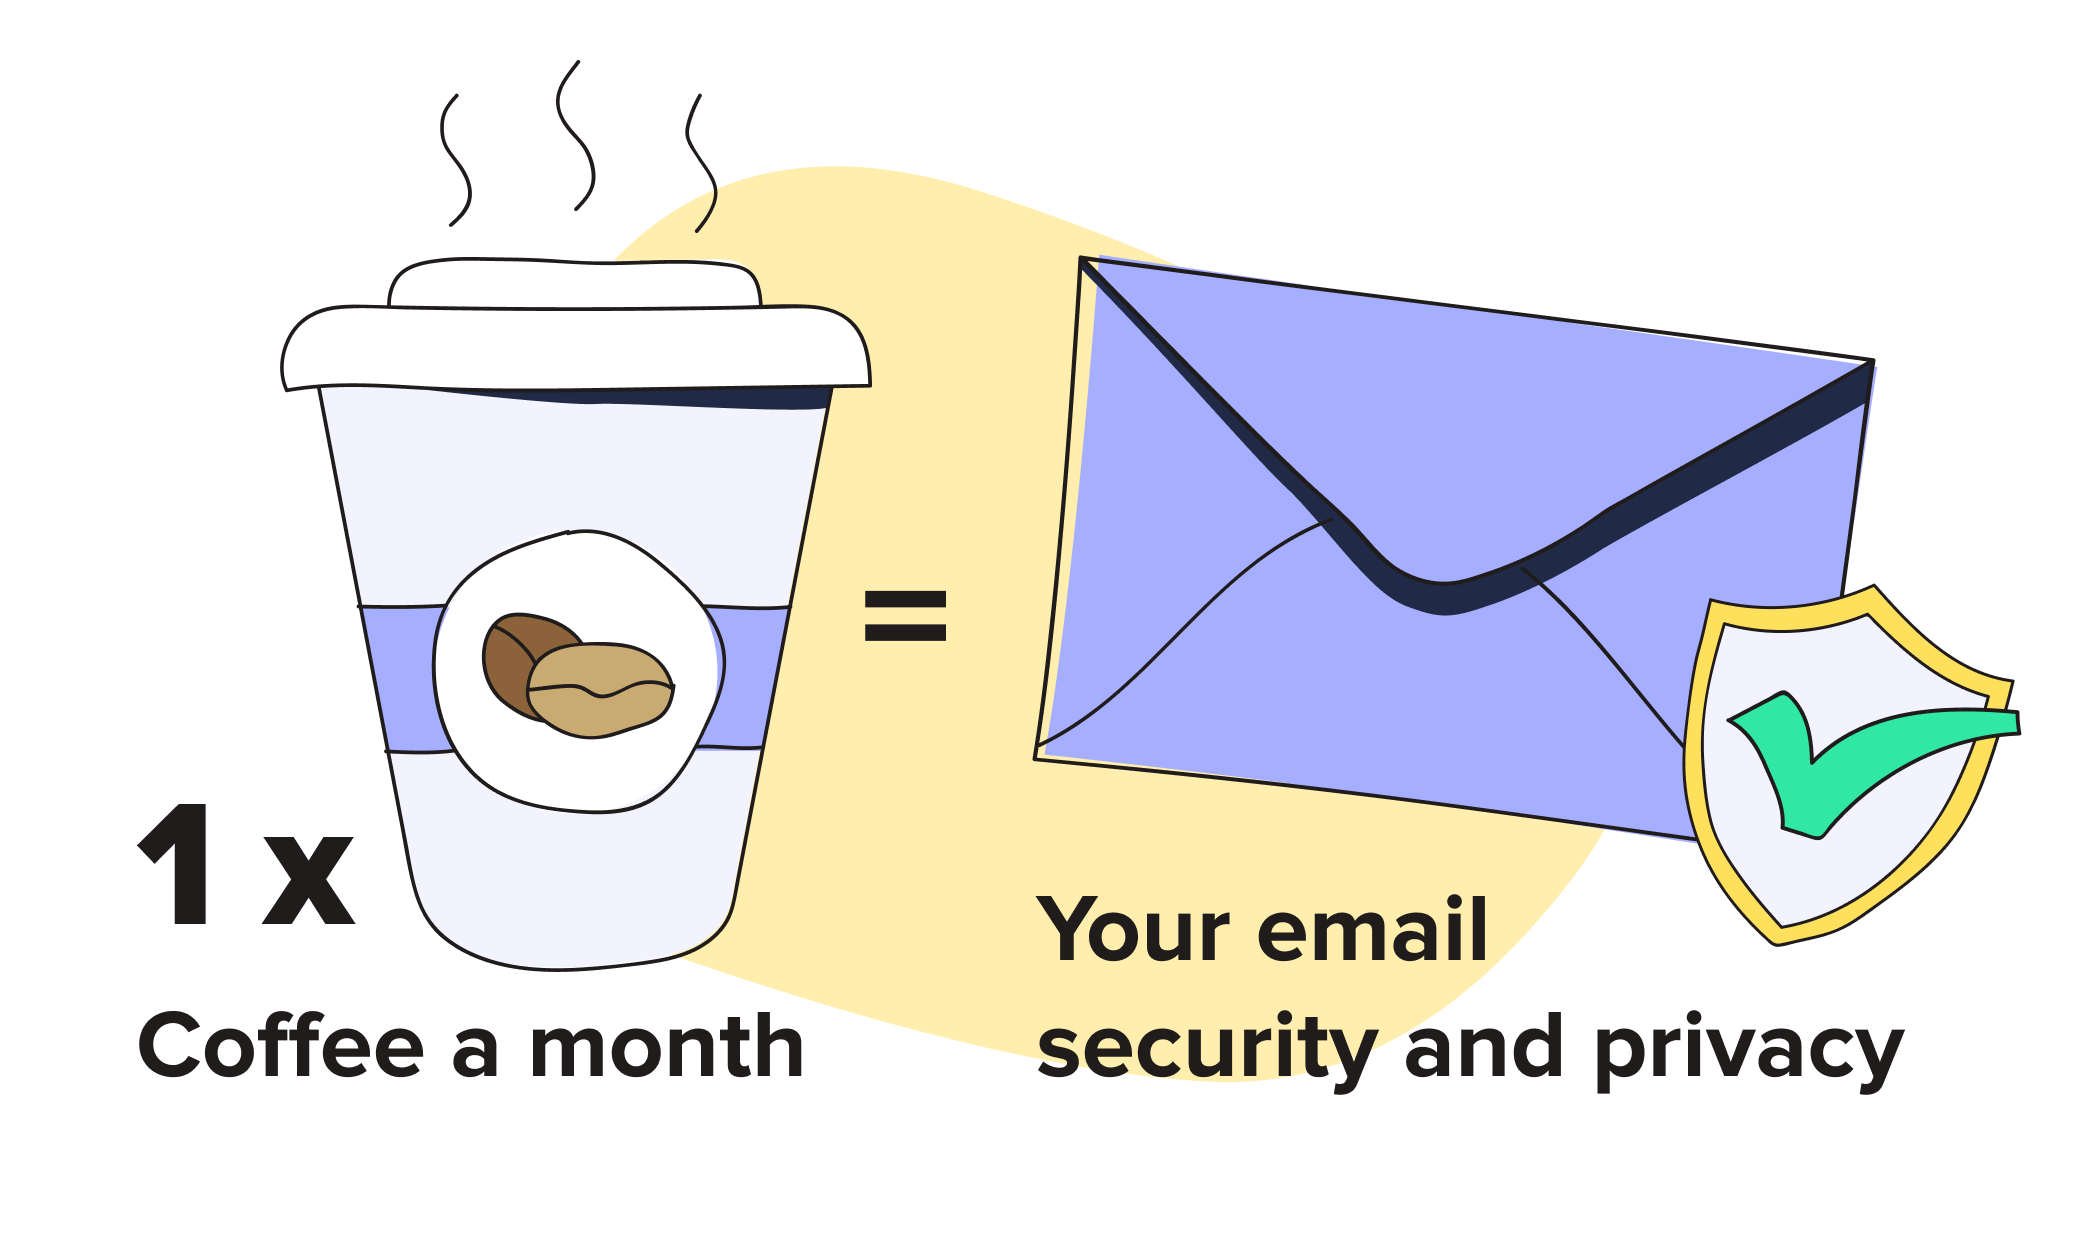 On the left an illustration of a cup of coffee with the text "1 x Coffee a month = Your email security and privacy". On the right an illustration of a blue envelope with a shield and a checkmark inside.